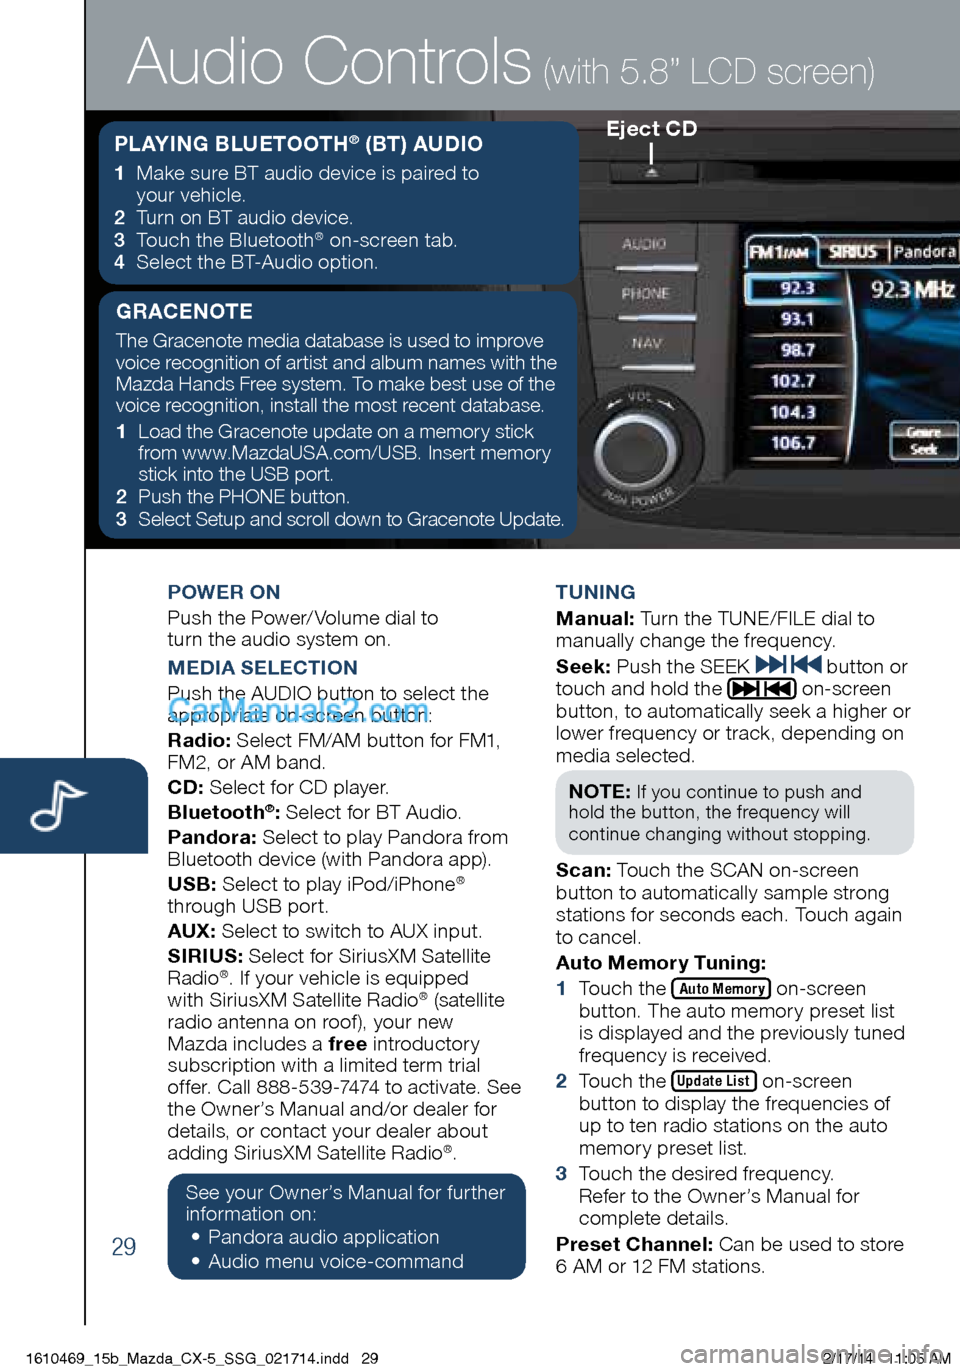 MAZDA MODEL CX-5 2015  Smart Start Guide (in English) POWER ON 
Push the Power/Volume dial to   
turn the audio system on.
MEDIA SELECTION
Push the AUDIO button to select the 
appropriate on-screen button:
Radio:  Select FM/AM button for FM1, 
FM2, or AM